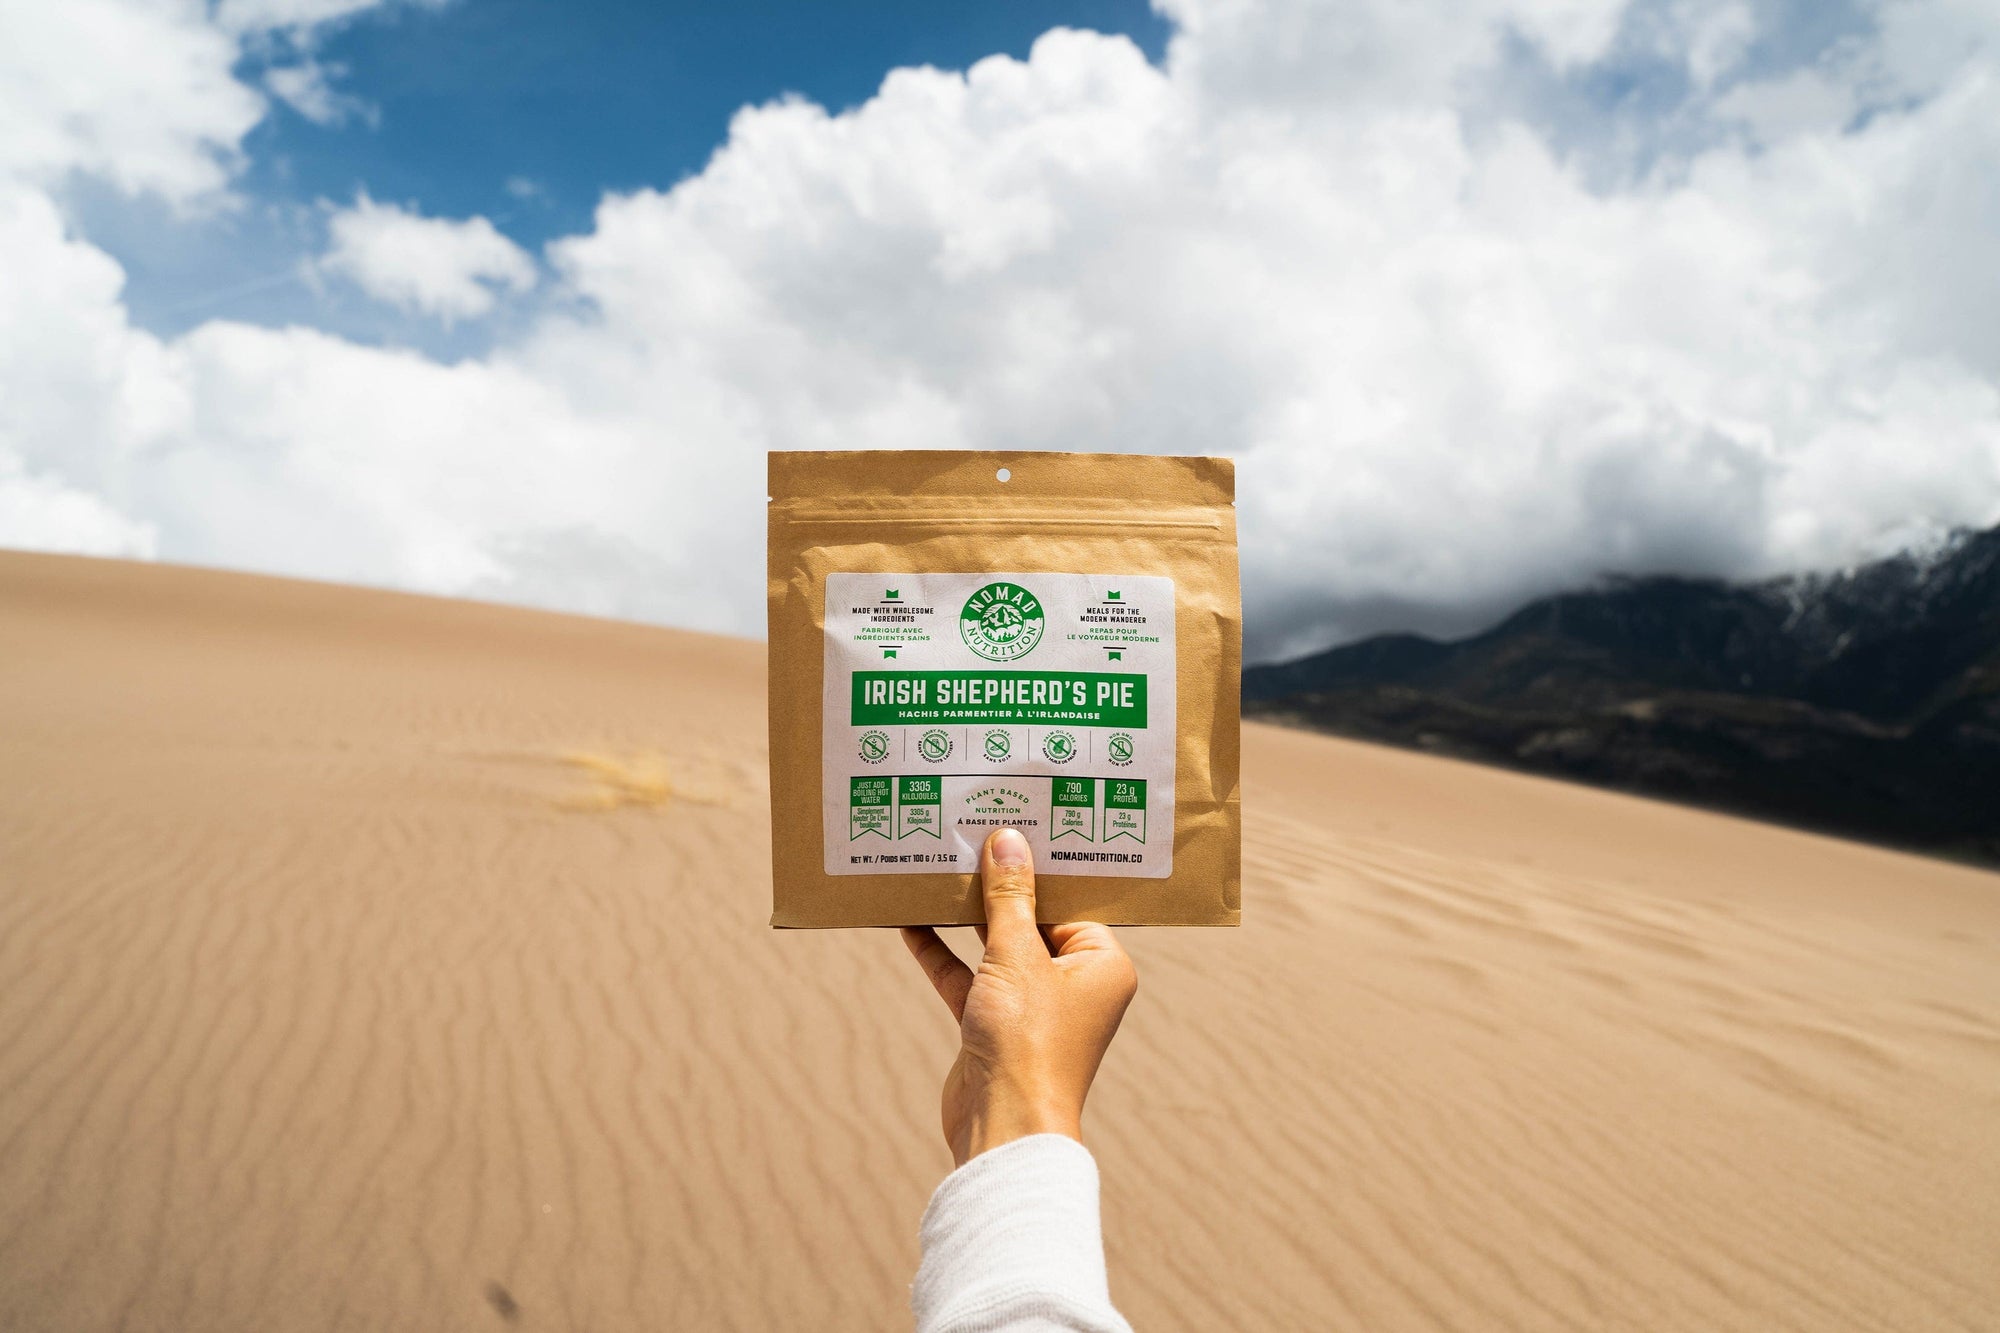 Nomad Nutrition Hungarian Goulash, vegan dehydrated adventure, camping, plant-based, gluten-free meal pictured at a scenic desert in a national park. 